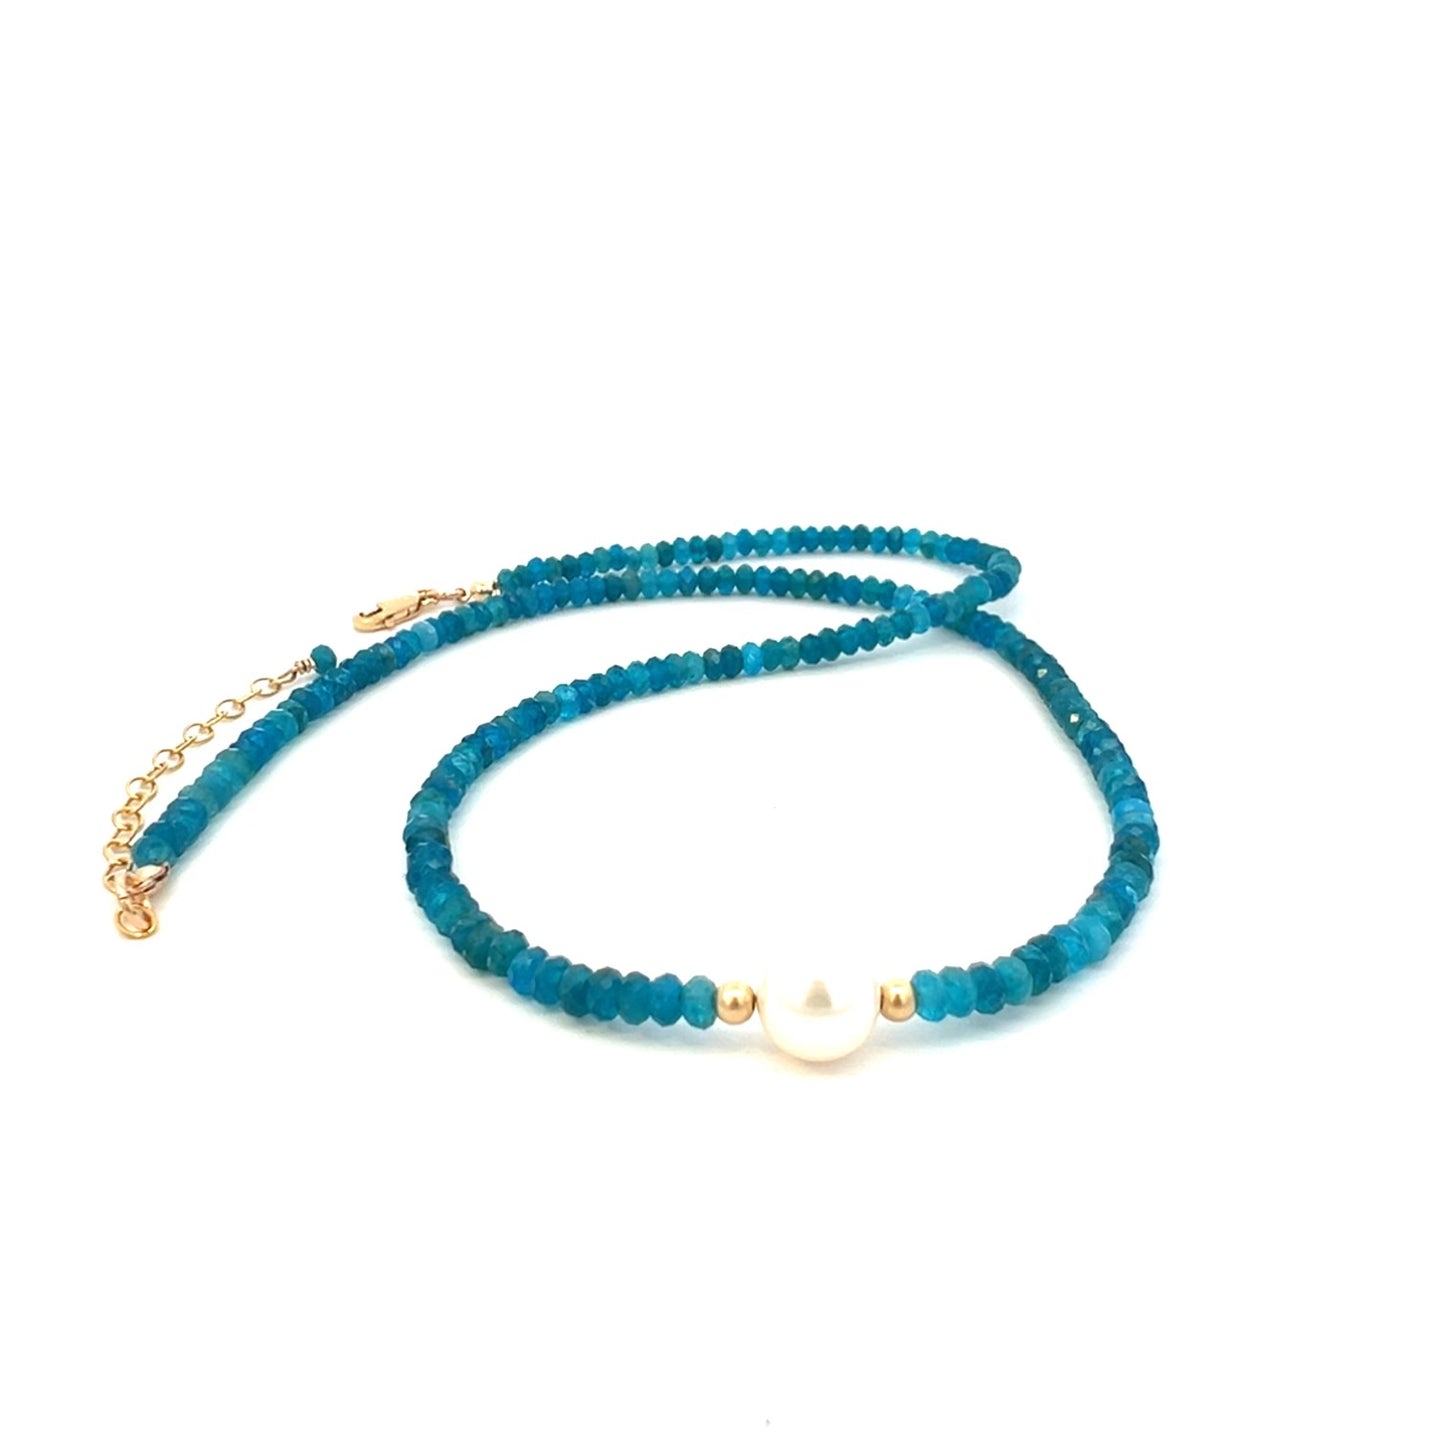 Neon blue apatite and Pearl necklace